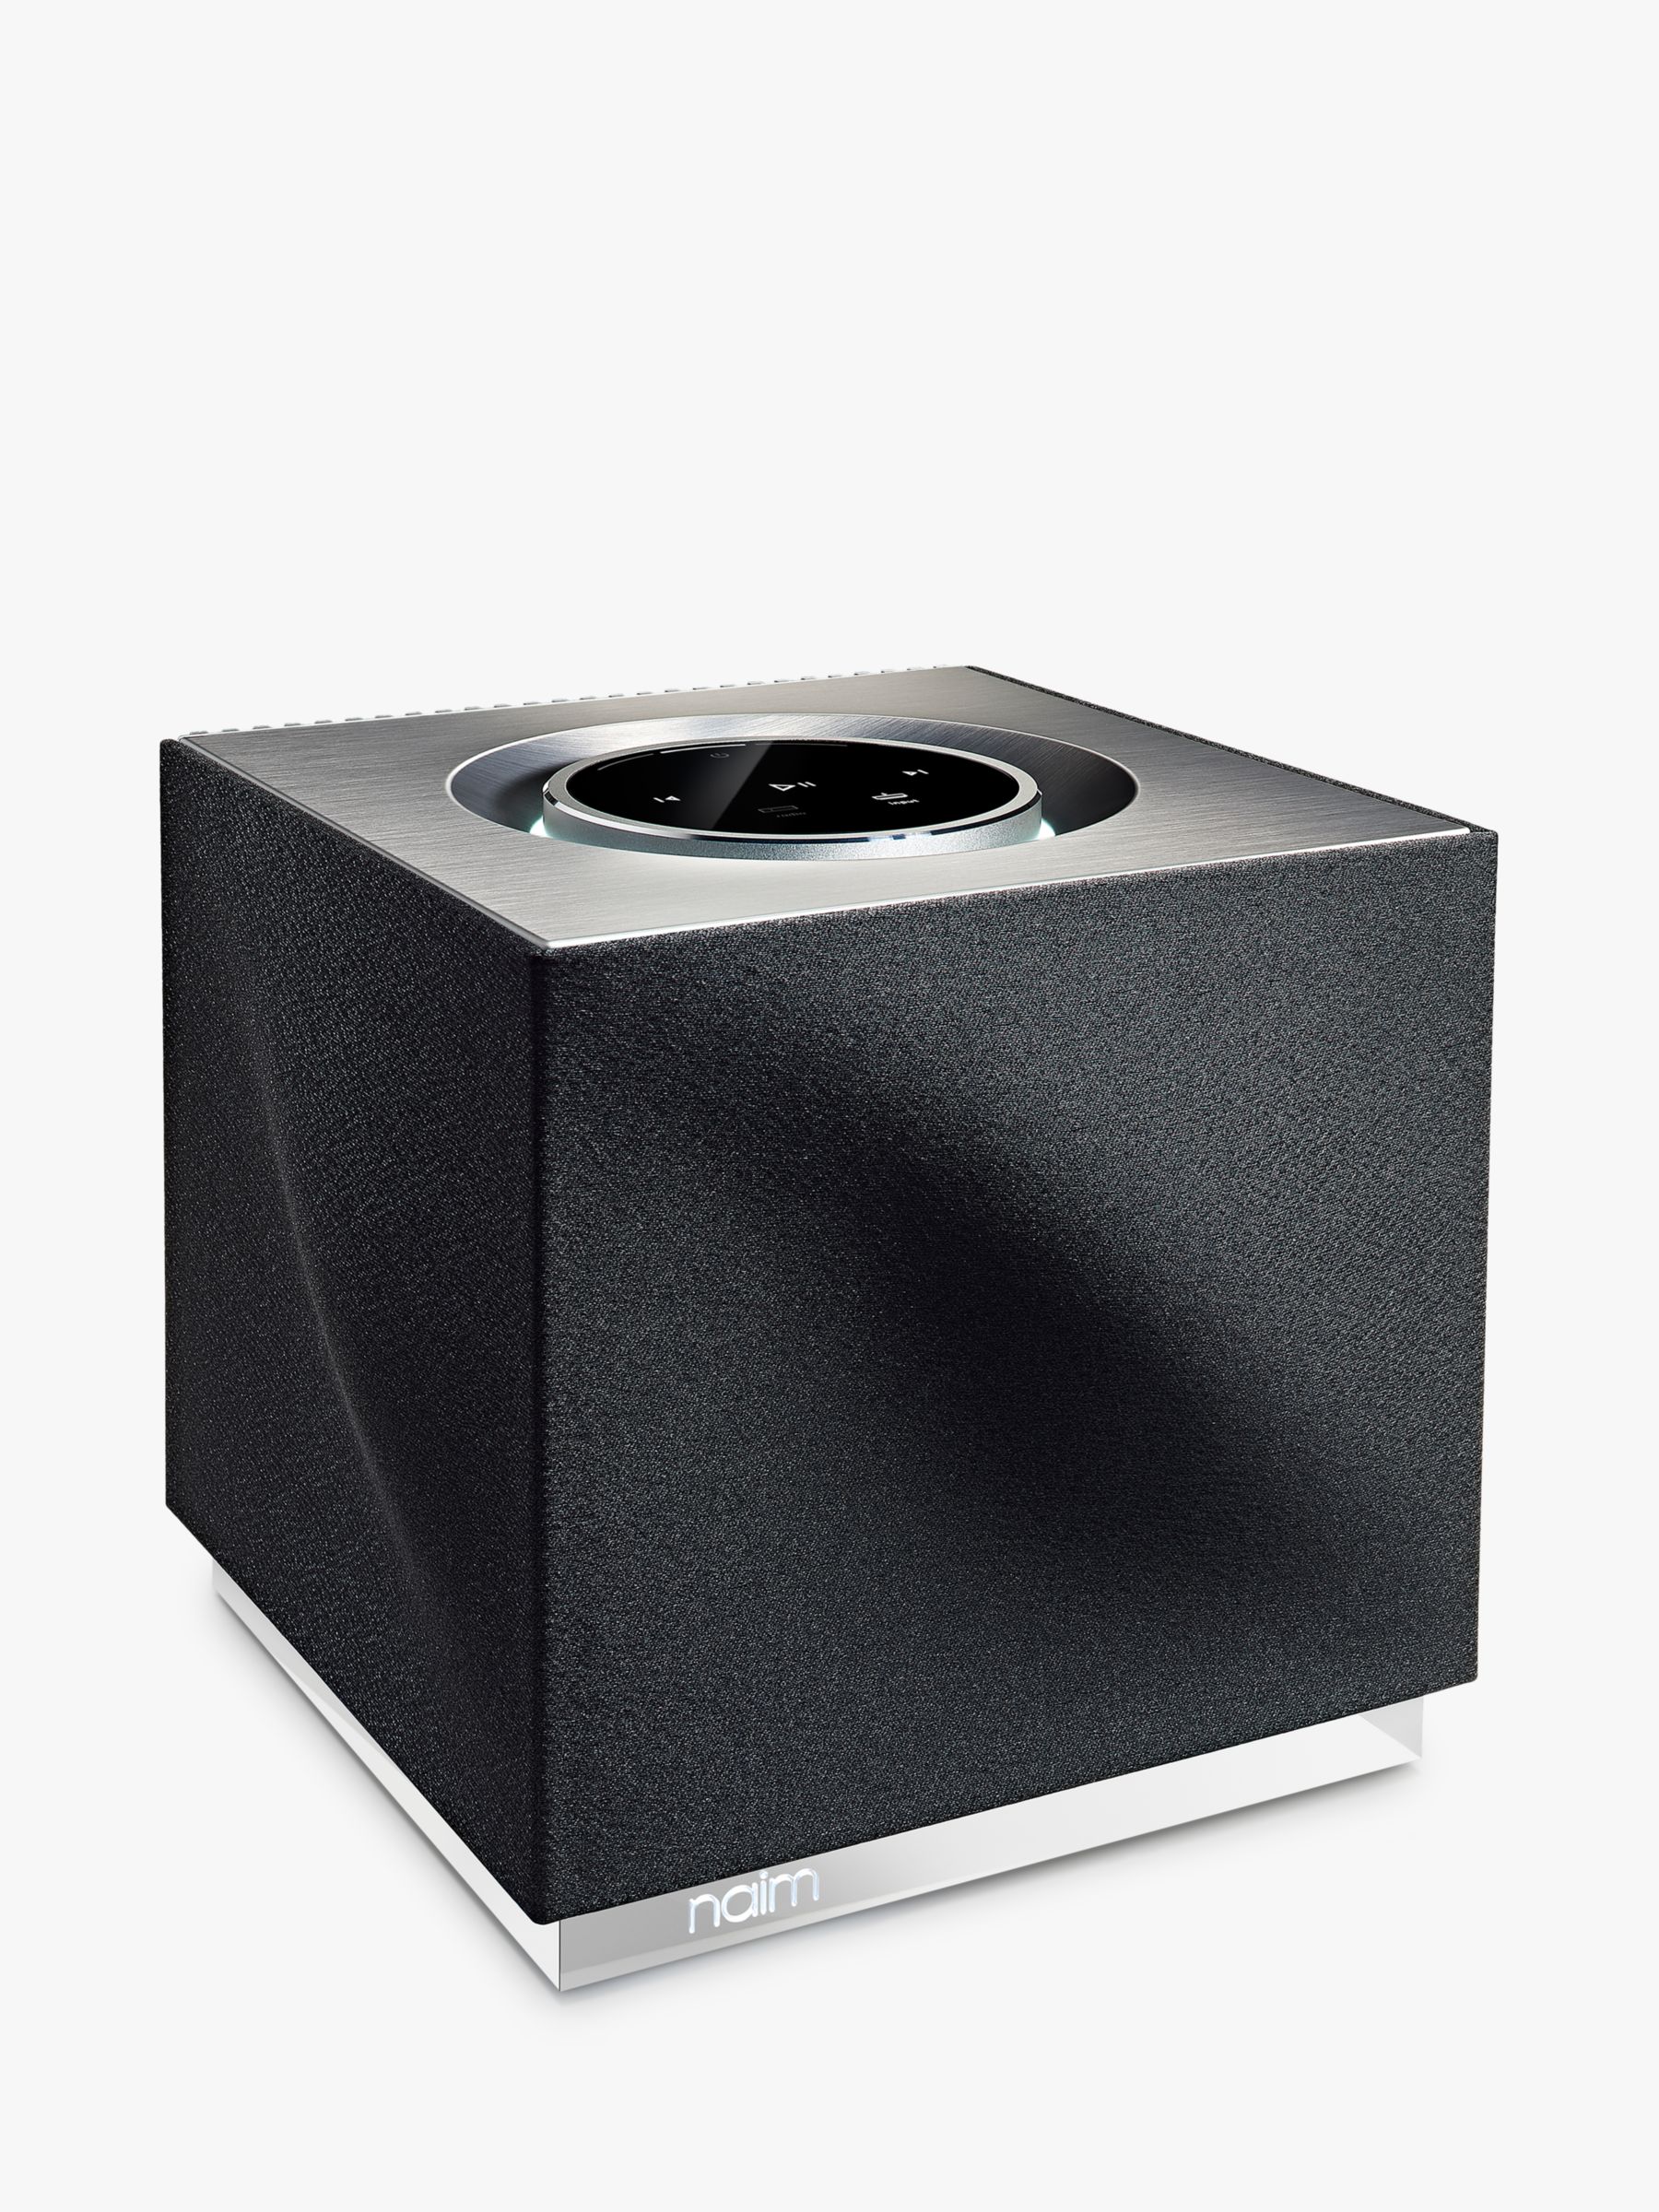 Buy Naim Audio Mu-so Qb Wireless Bluetooth Music System with Apple AirPlay, Spotify Connect & TIDAL Compatibility Online at johnlewis.com